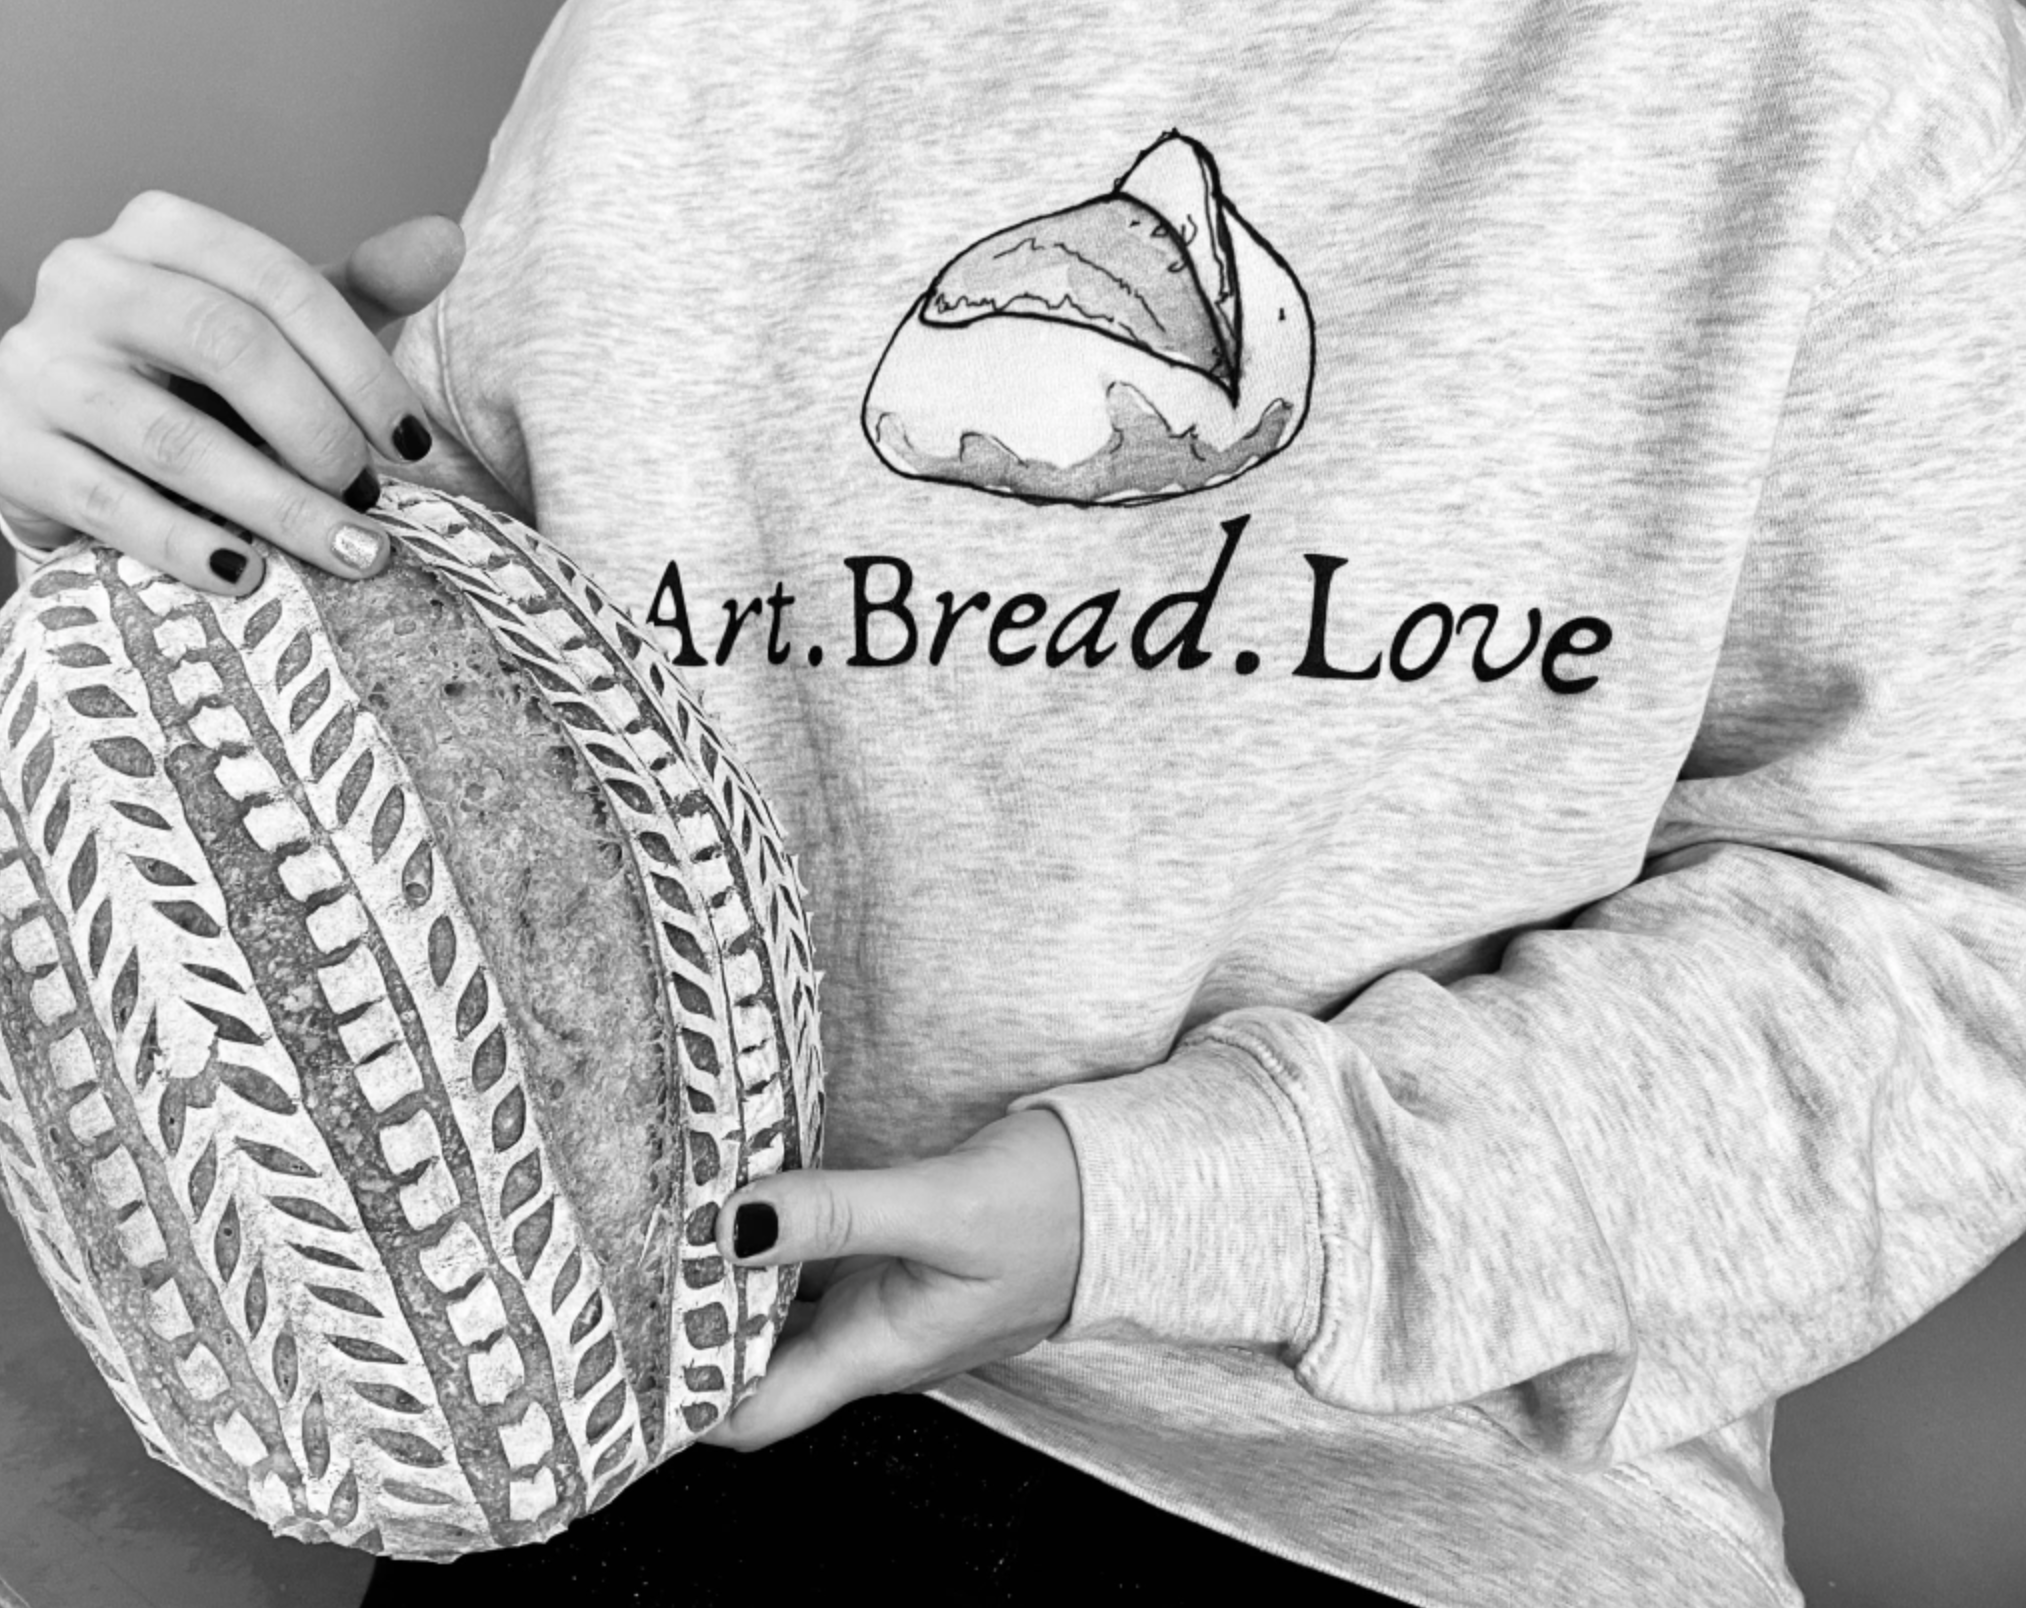 interview with home baker renee from artbreadlove on instagram sharing her story